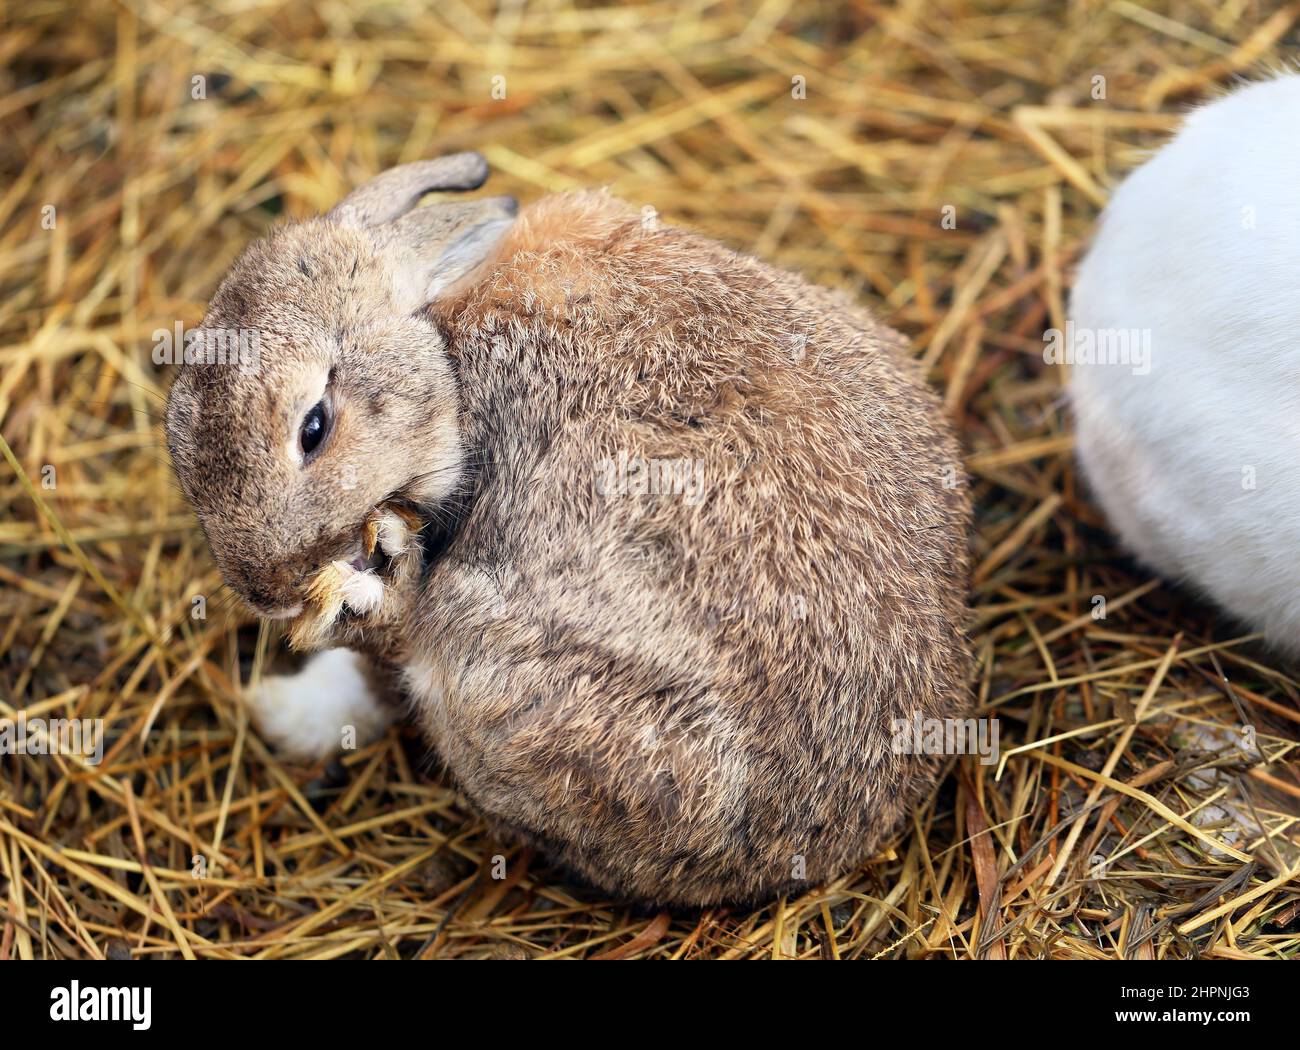 beautiful gray rabbit is lying on the hay photographed in close-up Stock Photo